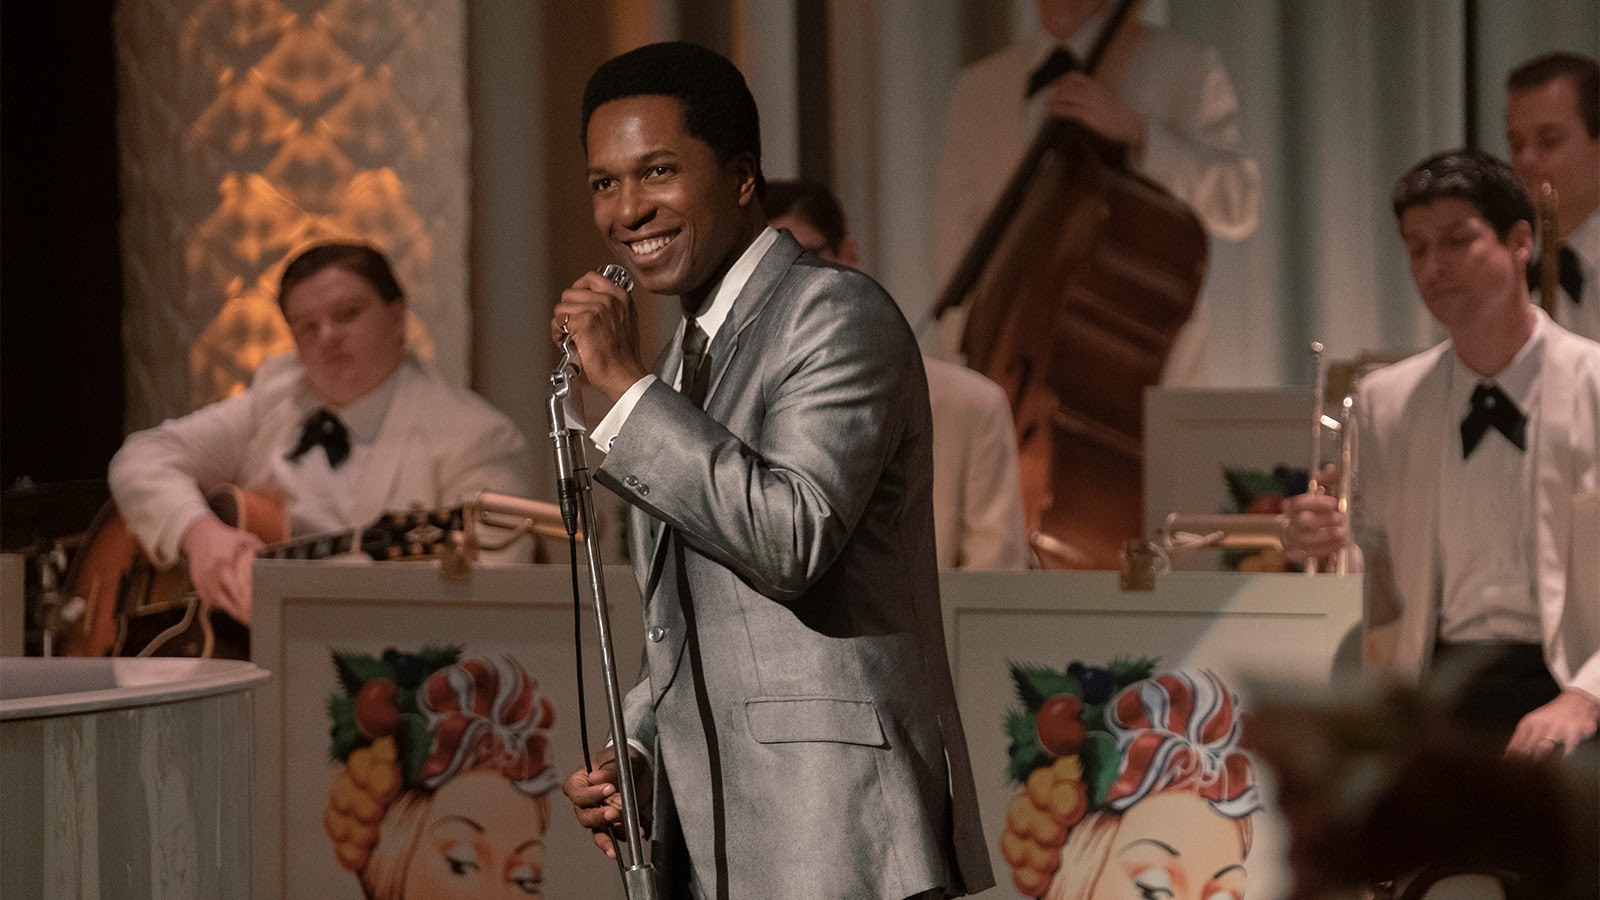 Leslie Odom Jr. playing (and singing) Sam Cooke in One Night in Miami. Image © Amazon